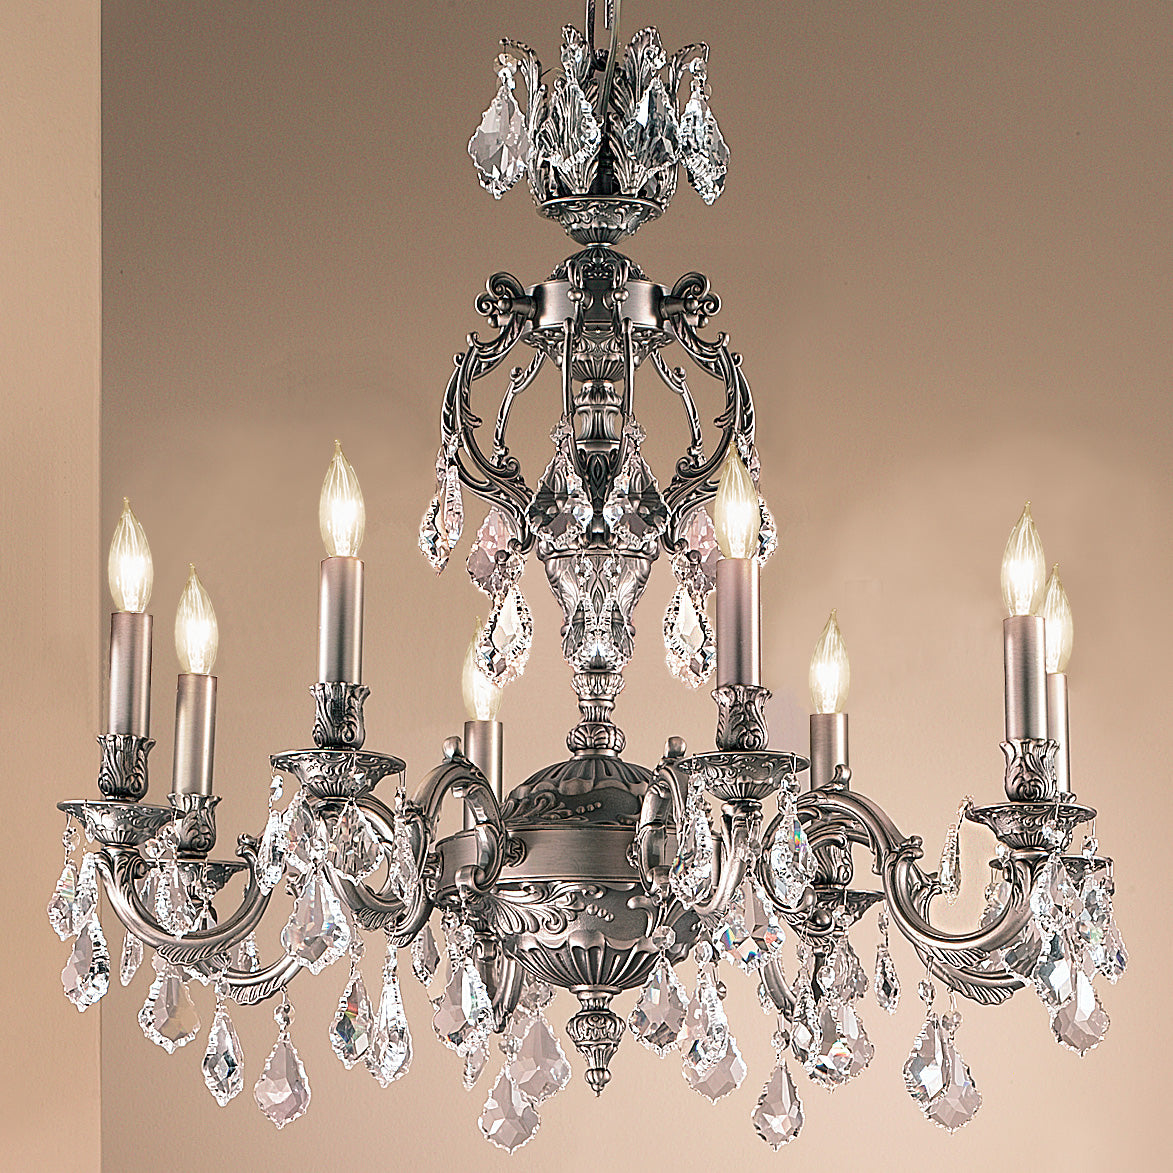 Classic Lighting 57378 AGB CBK Chateau Crystal Chandelier in Aged Bronze (Imported from Spain)